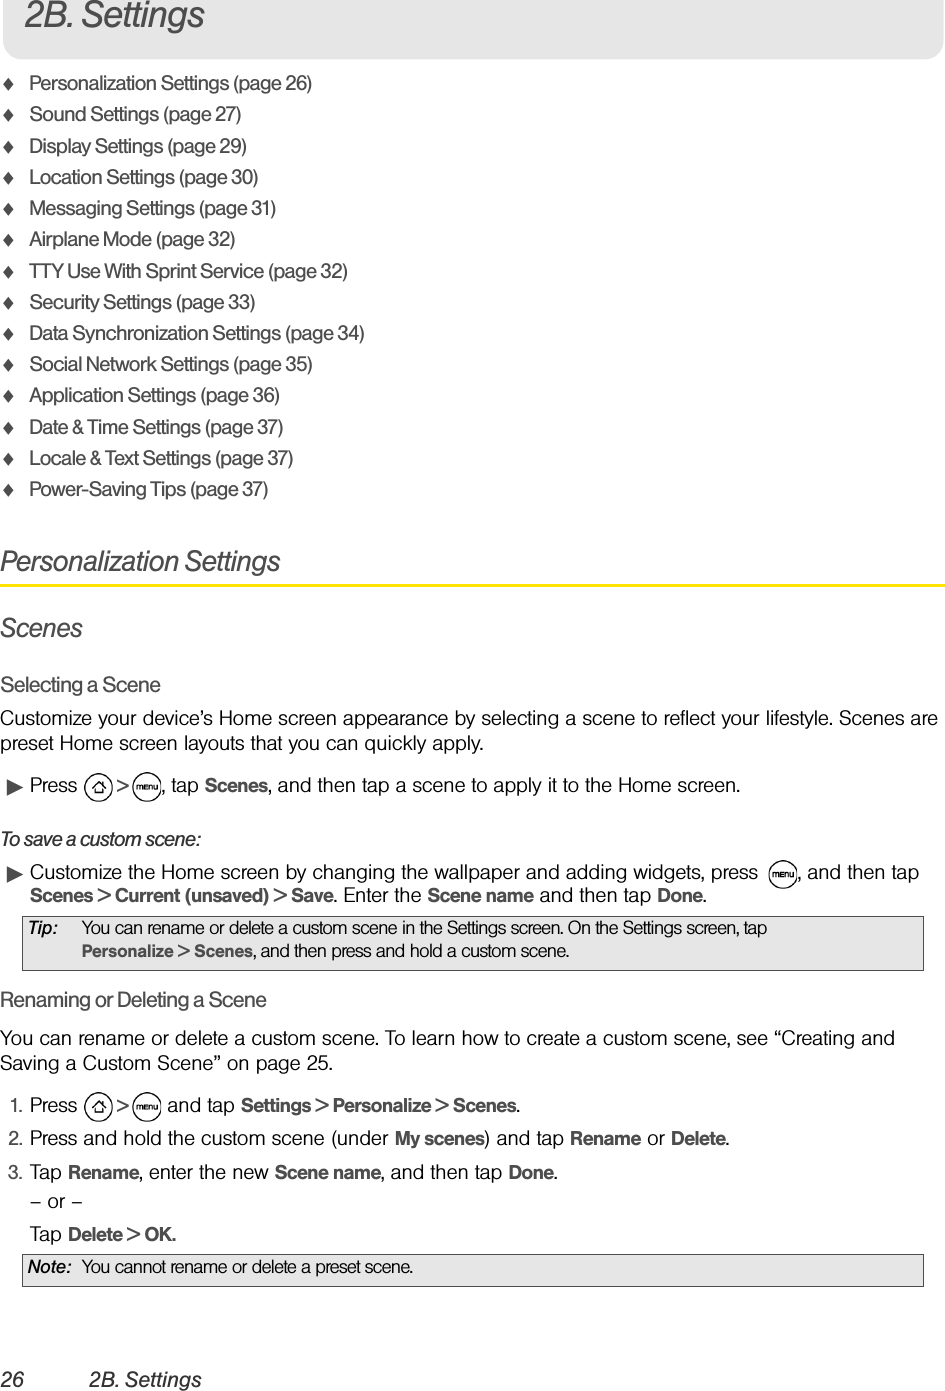 26 2B. SettingsࡗPersonalization Settings (page 26)ࡗSound Settings (page 27)ࡗDisplay Settings (page 29)ࡗLocation Settings (page 30)ࡗMessaging Settings (page 31)ࡗAirplane Mode (page 32)ࡗTTY Use With Sprint Service (page 32)ࡗSecurity Settings (page 33)ࡗData Synchronization Settings (page 34)ࡗSocial Network Settings (page 35)ࡗApplication Settings (page 36)ࡗDate &amp; Time Settings (page 37)ࡗLocale &amp; Text Settings (page 37)ࡗPower-Saving Tips (page 37)Personalization SettingsScenesSelecting a SceneCustomize your device’s Home screen appearance by selecting a scene to reflect your lifestyle. Scenes are preset Home screen layouts that you can quickly apply.ᮣPress   &gt;  , tap Scenes, and then tap a scene to apply it to the Home screen.To save a custom scene: ᮣCustomize the Home screen by changing the wallpaper and adding widgets, press  , and then tap Scenes &gt; Current (unsaved) &gt; Save. Enter the Scene name and then tap Done.Renaming or Deleting a SceneYou can rename or delete a custom scene. To learn how to create a custom scene, see “Creating and Saving a Custom Scene” on page 25.1. Press   &gt;   and tap Settings &gt; Personalize &gt; Scenes.2. Press and hold the custom scene (under My scenes) and tap Rename or Delete.3. Tap Rename, enter the new Scene name, and then tap Done.– or –Tap Delete &gt; OK.Tip: You can rename or delete a custom scene in the Settings screen. On the Settings screen, tap Personalize &gt; Scenes, and then press and hold a custom scene.Note: You cannot rename or delete a preset scene.2B. Settings